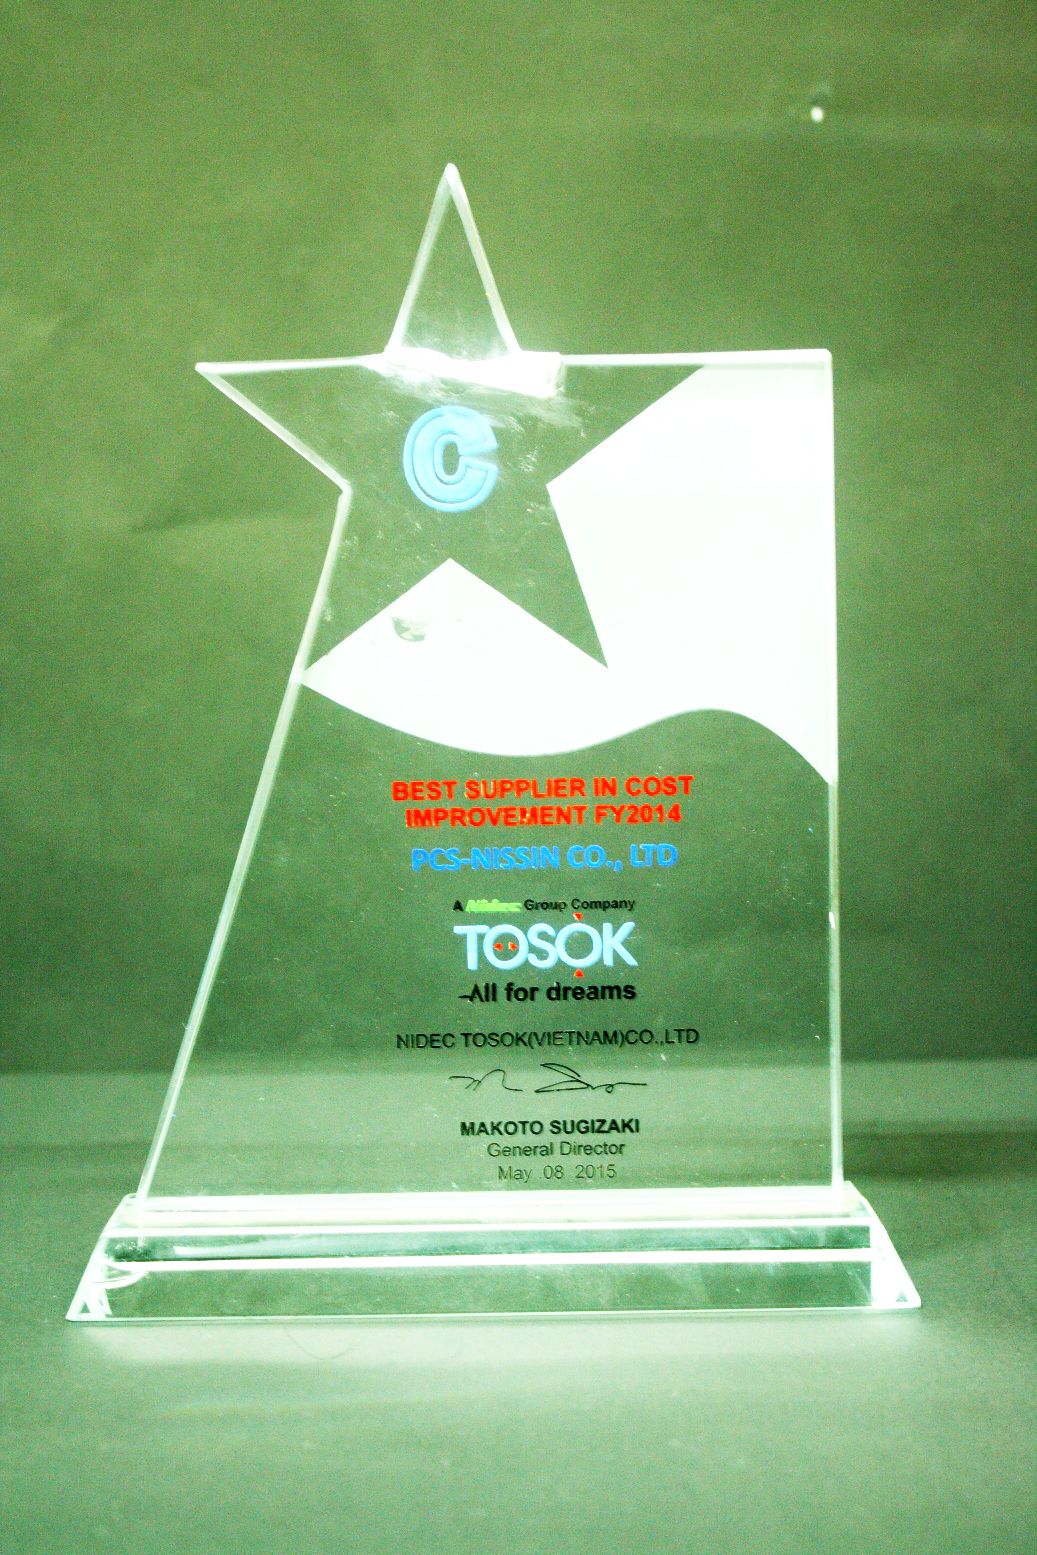 Best-Cost-Supplier-of-Nidec-Tosok-2014